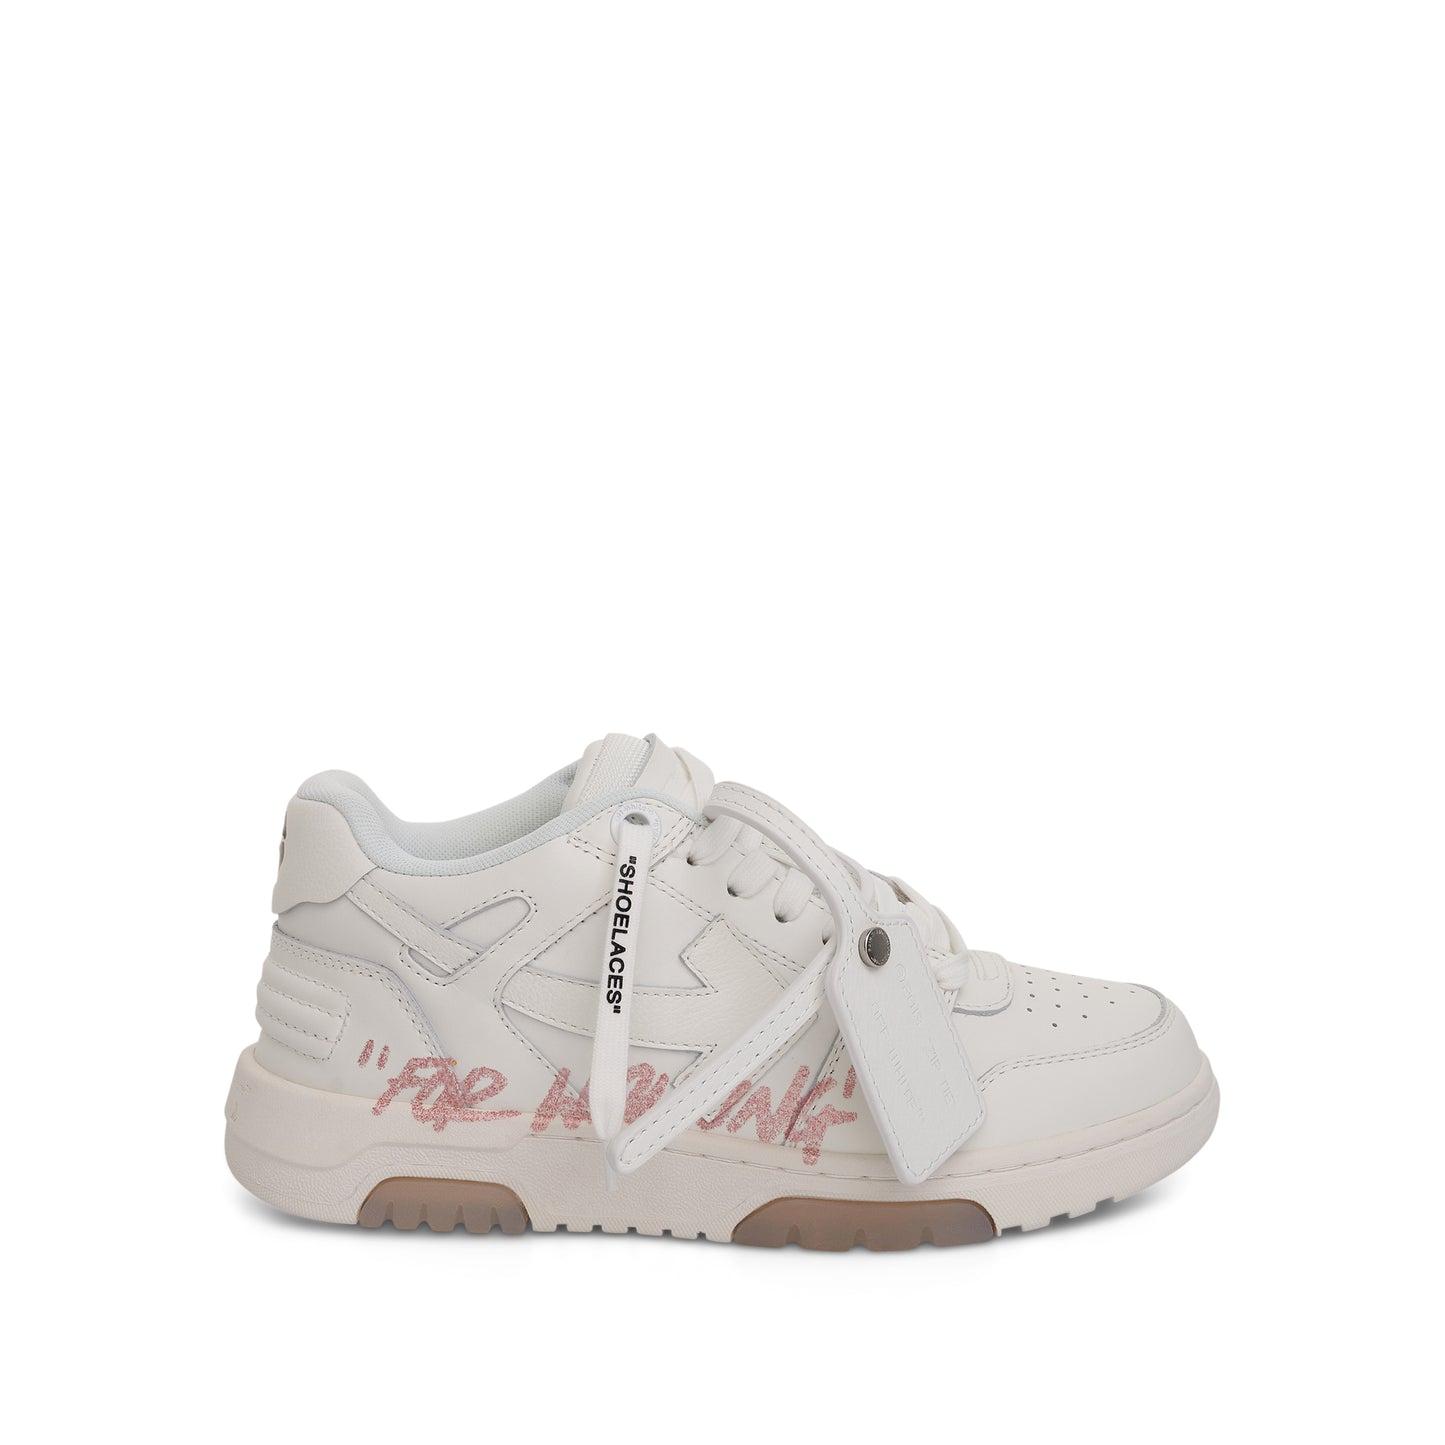 Out Of Office "For Walking" Sneakers in White/Peach